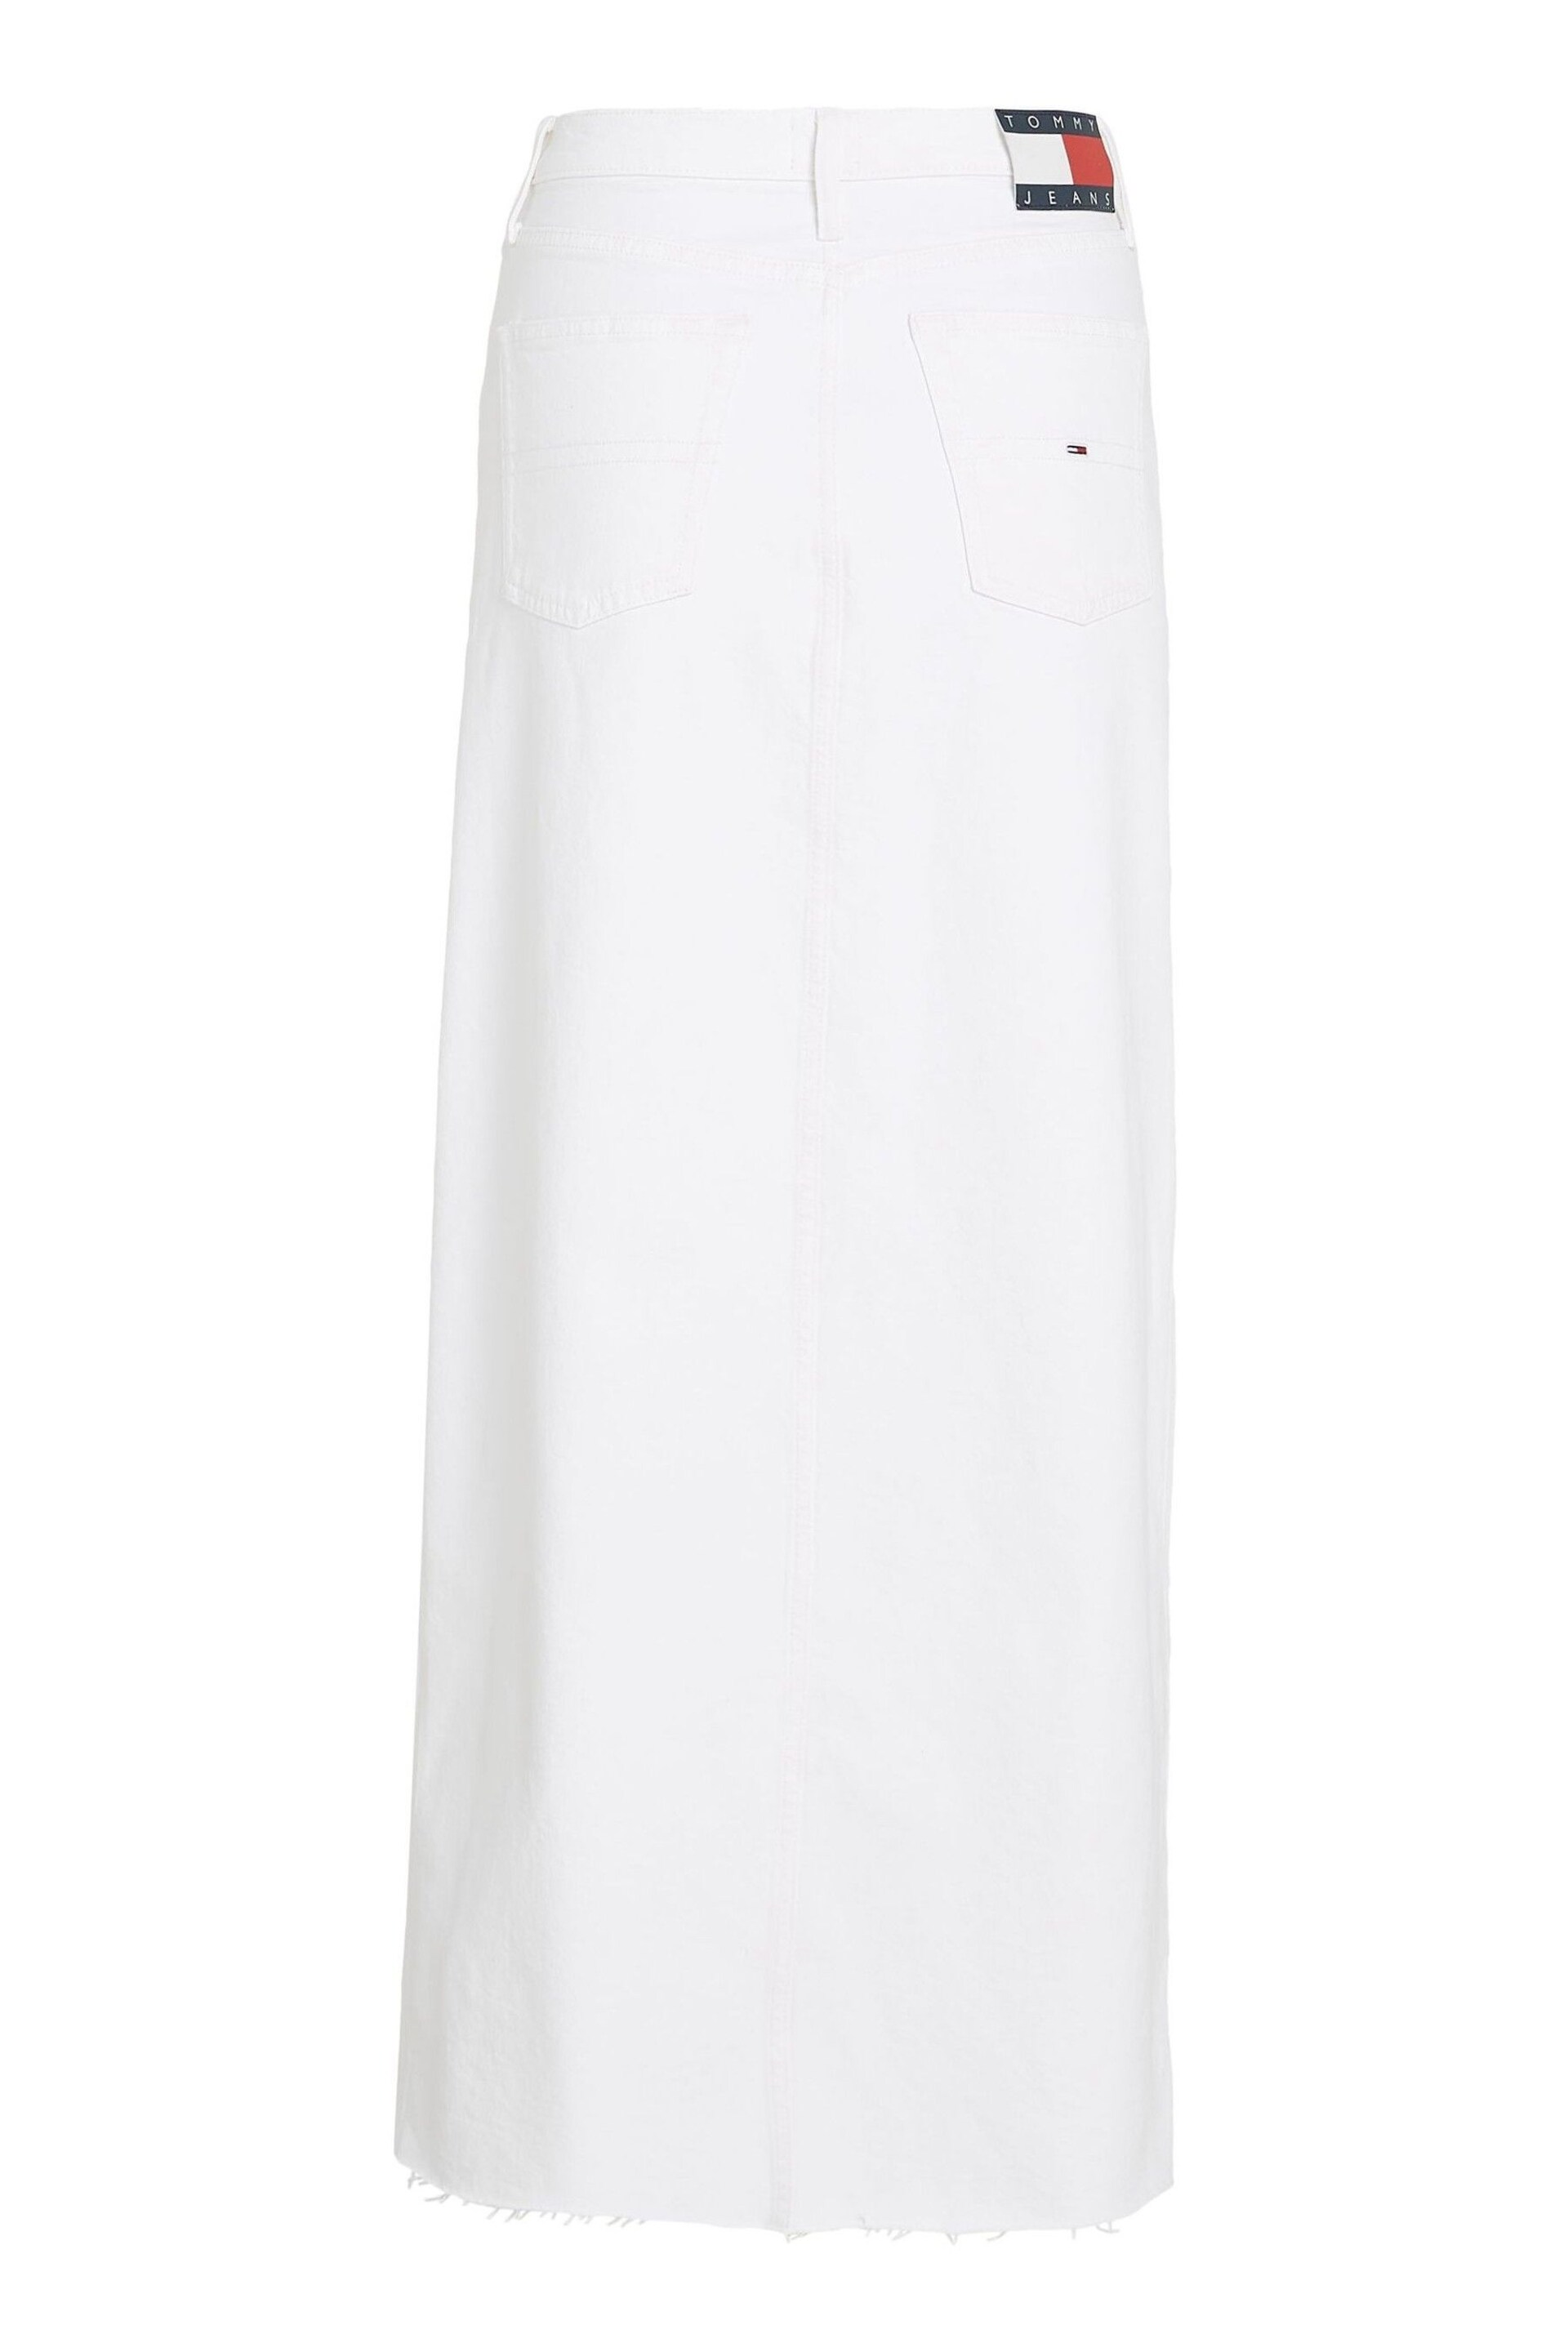 Tommy Jeans Claire High Maxi White Skirt - Image 5 of 6